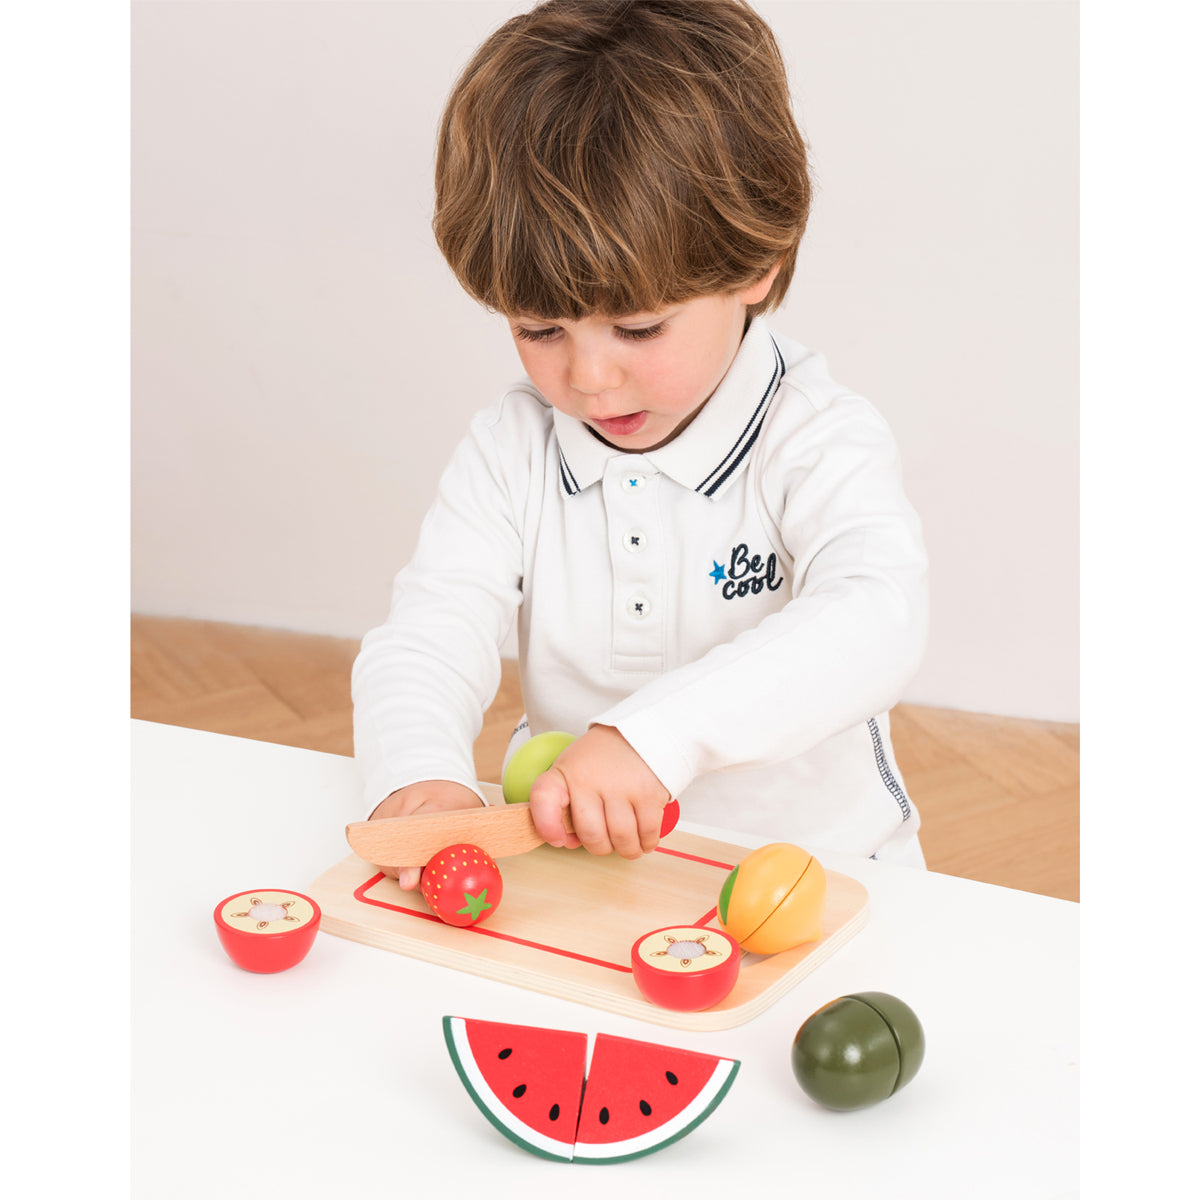 New Classic Toys Wooden Food Cutting Play Set – Fruit